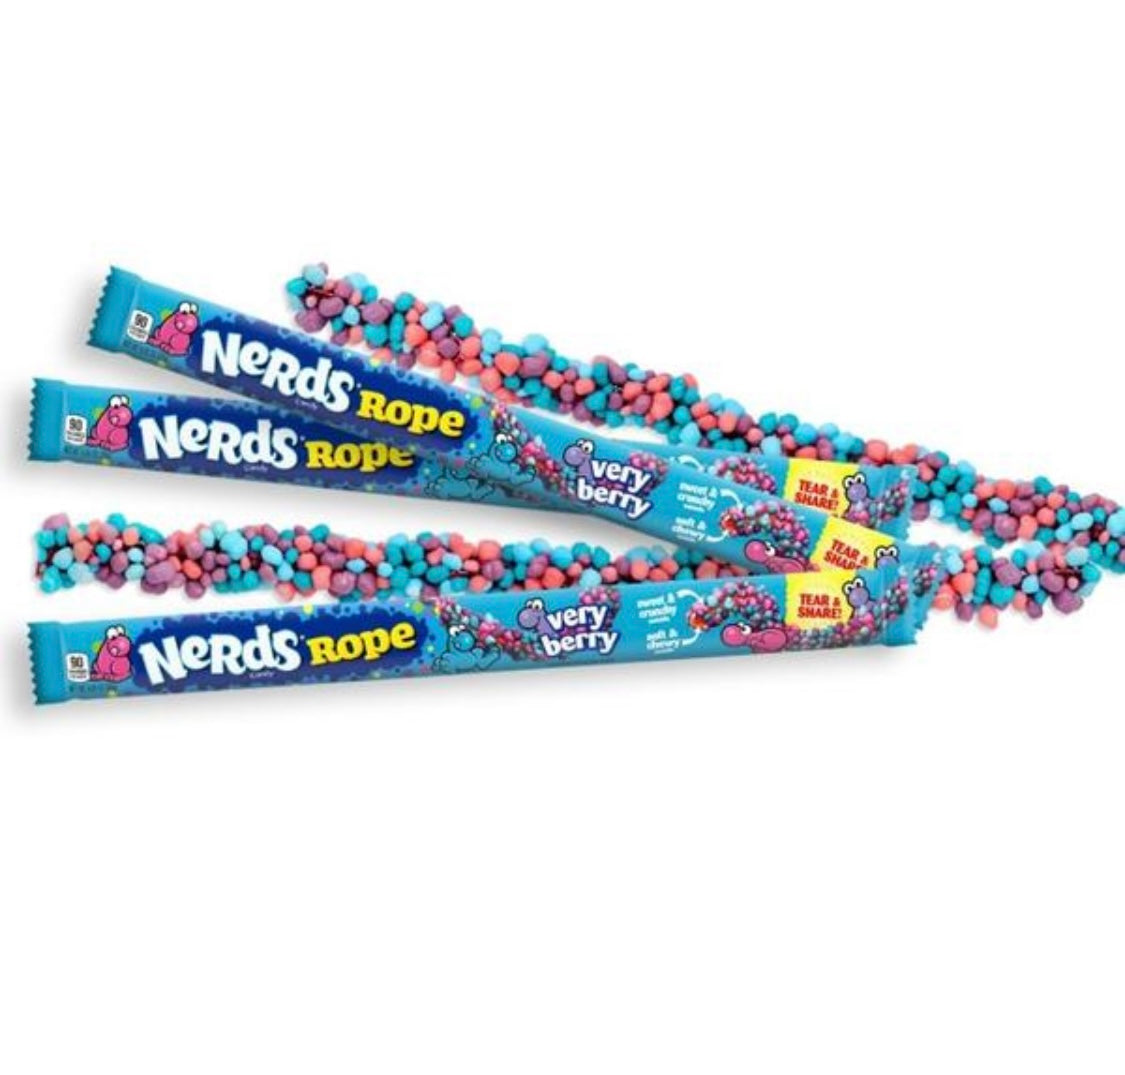 NERDS ROPE VERY BERRY GUSTO MORE